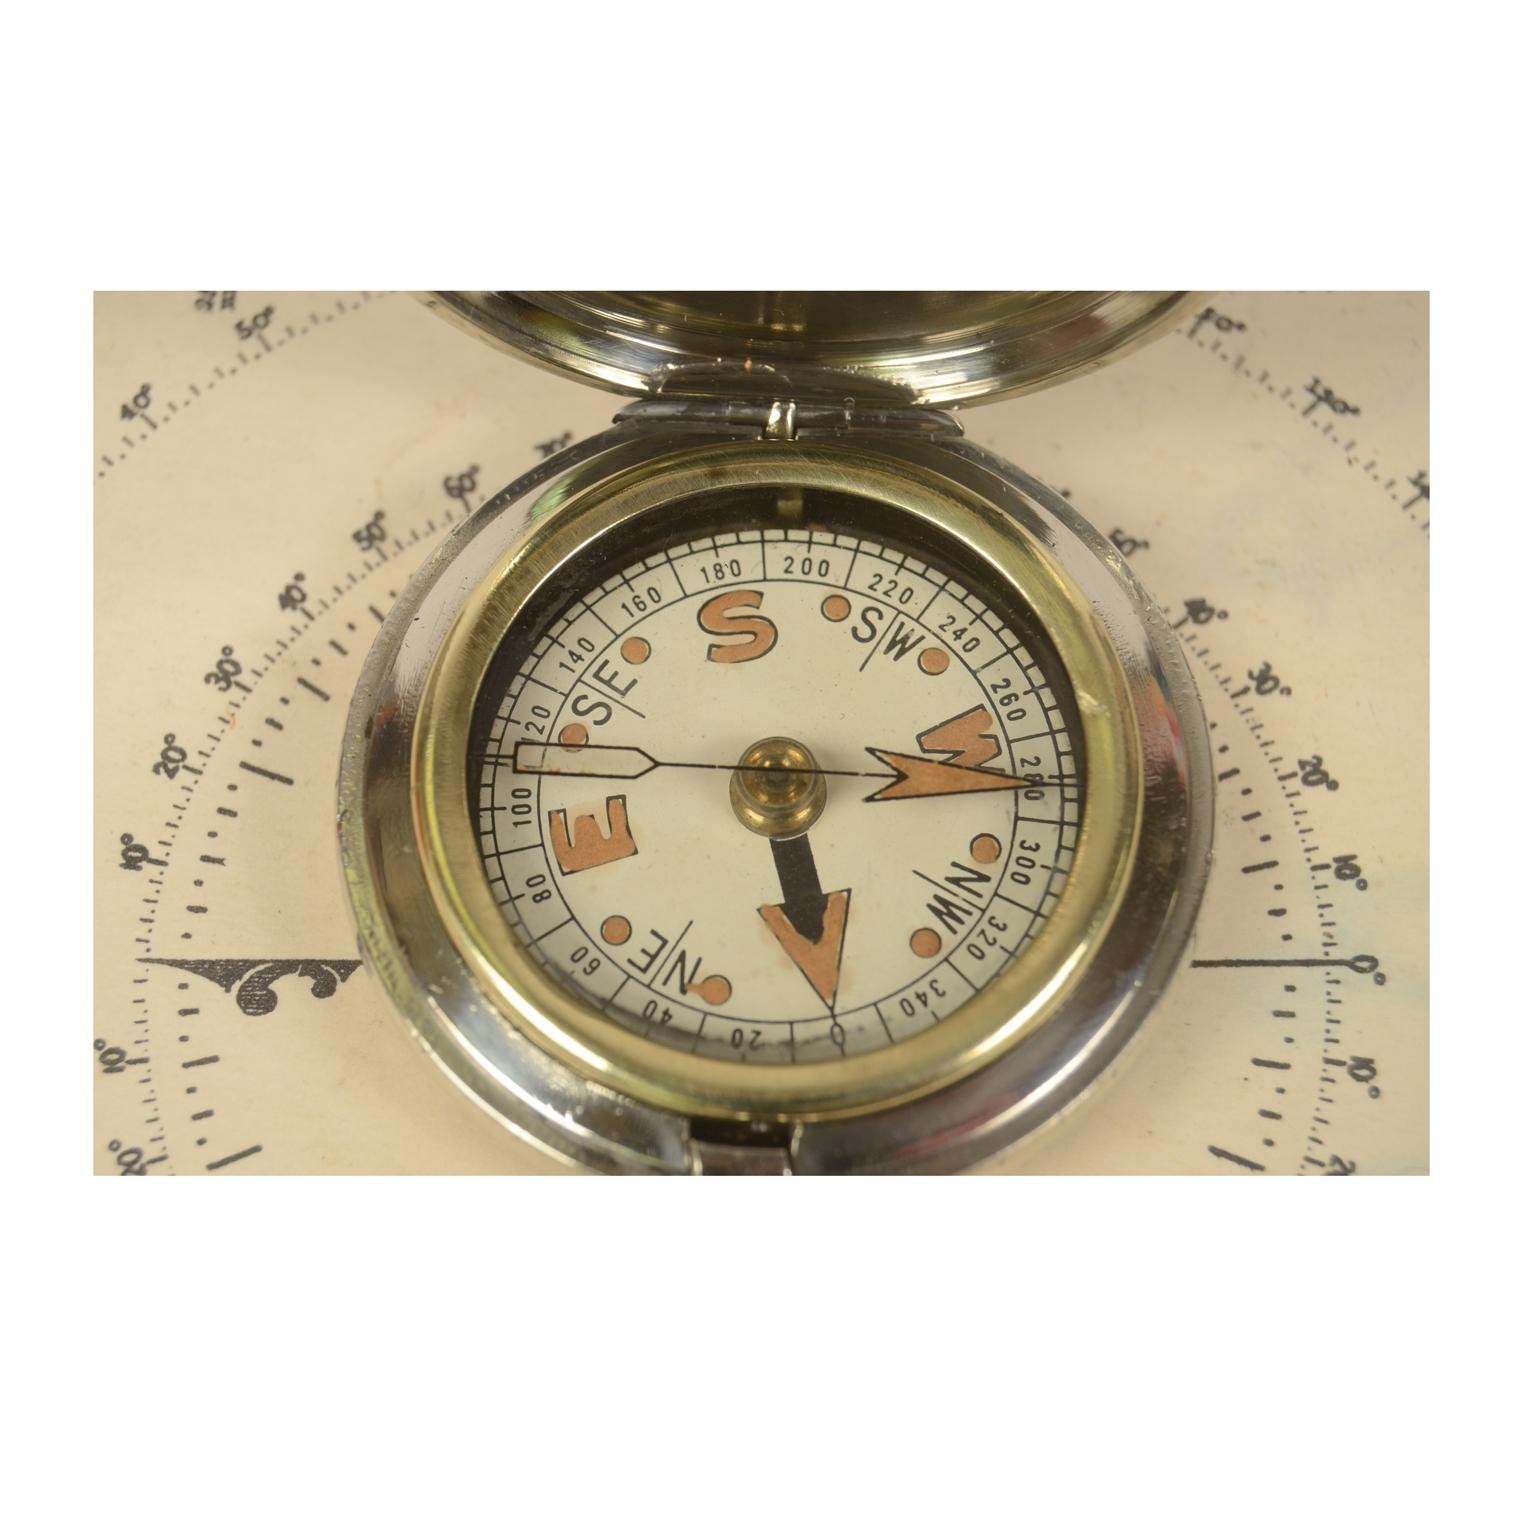 Pocket Compass Used by the British Navy in the WWI 1